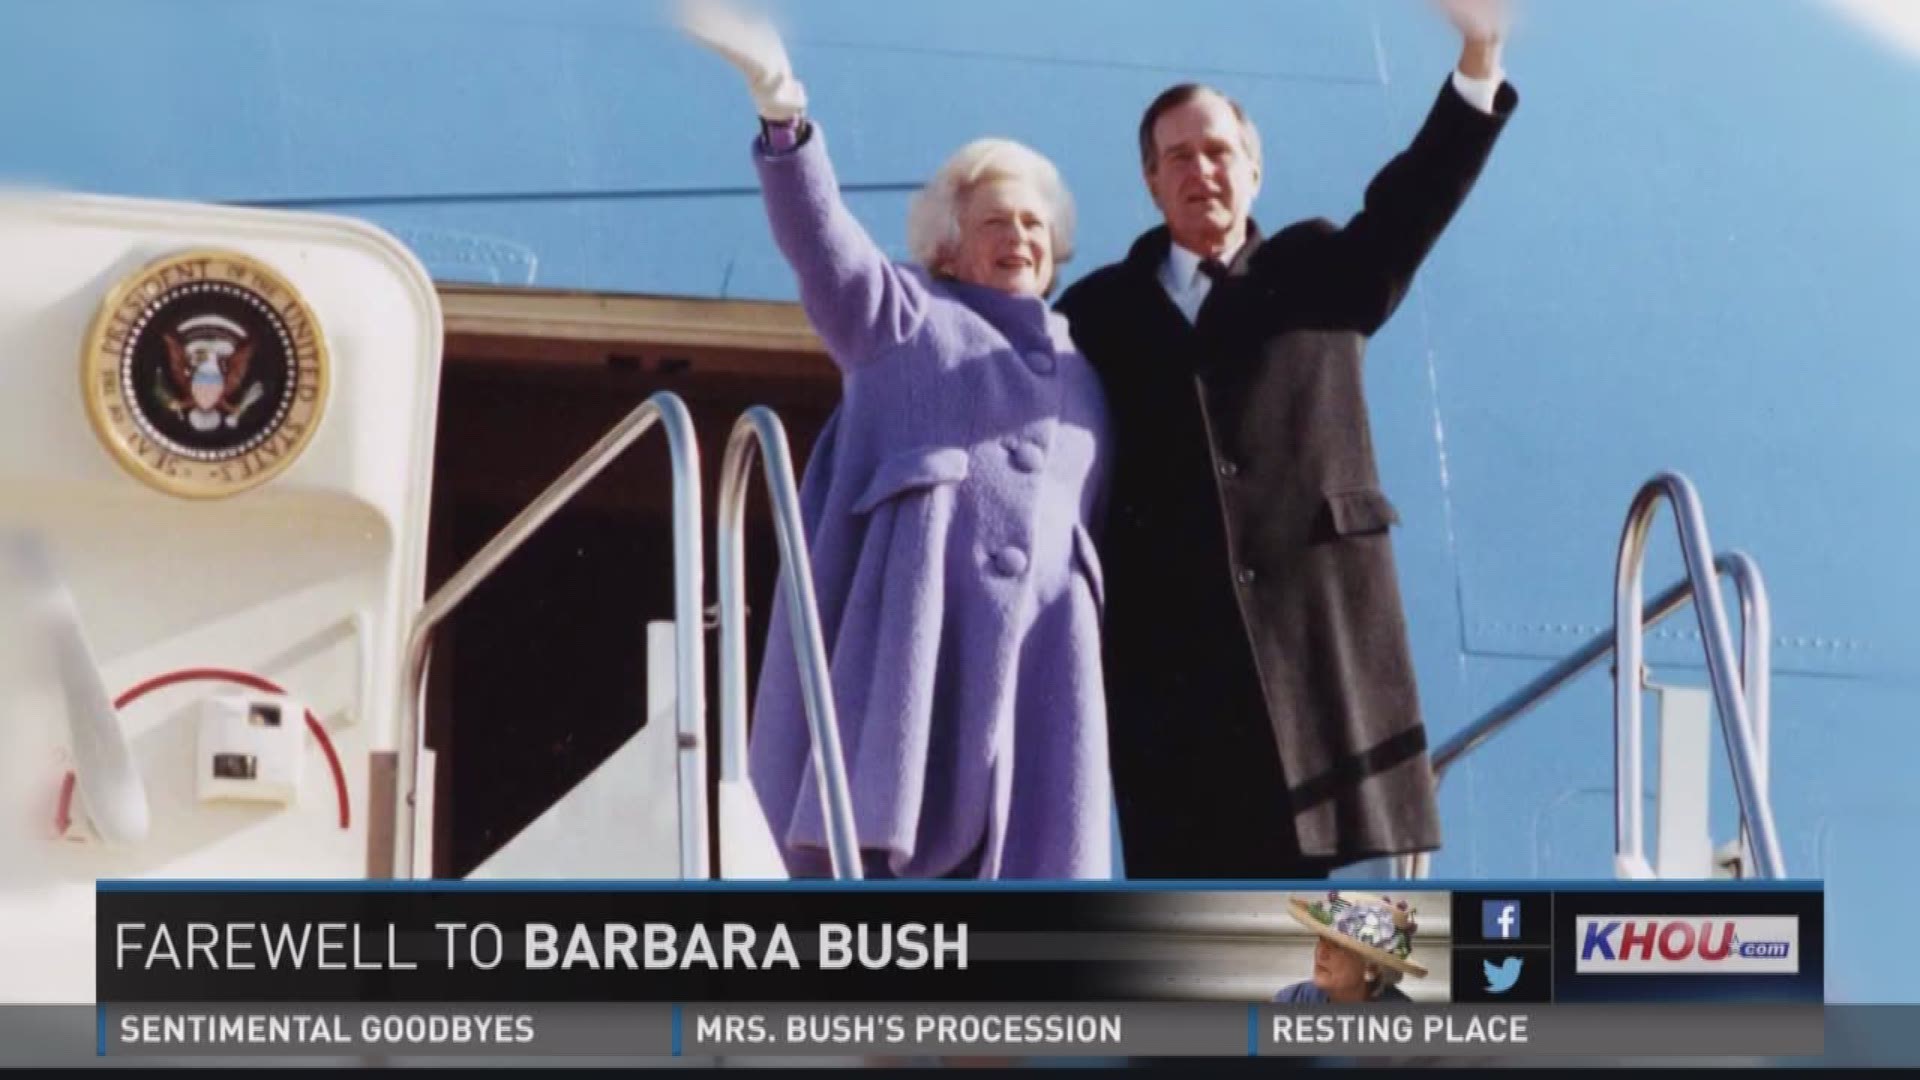 The funeral may have been private but it was being televised and millions watched as Barbara Bush's life was celebrated.